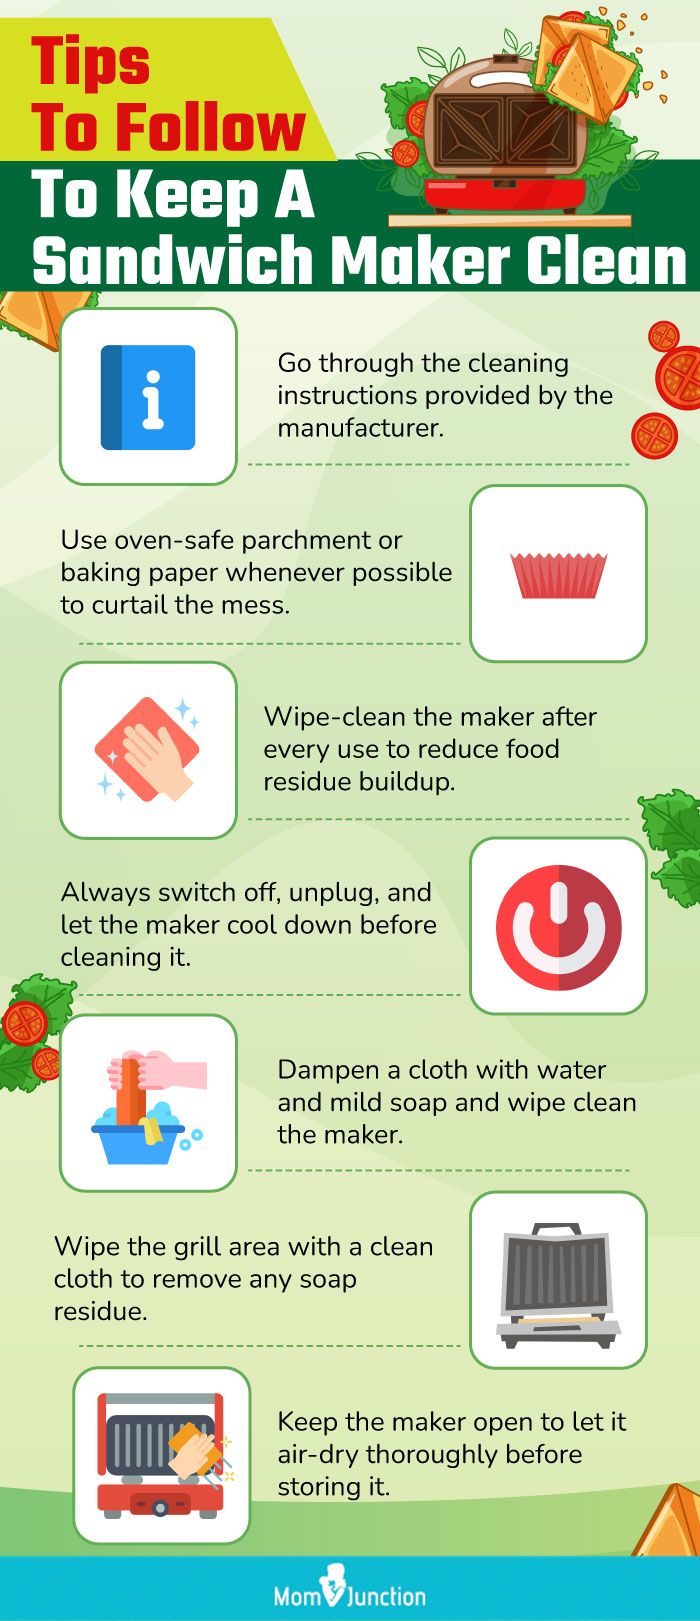 Tips To Follow To Keep A Sandwich Maker Clean (infographic)